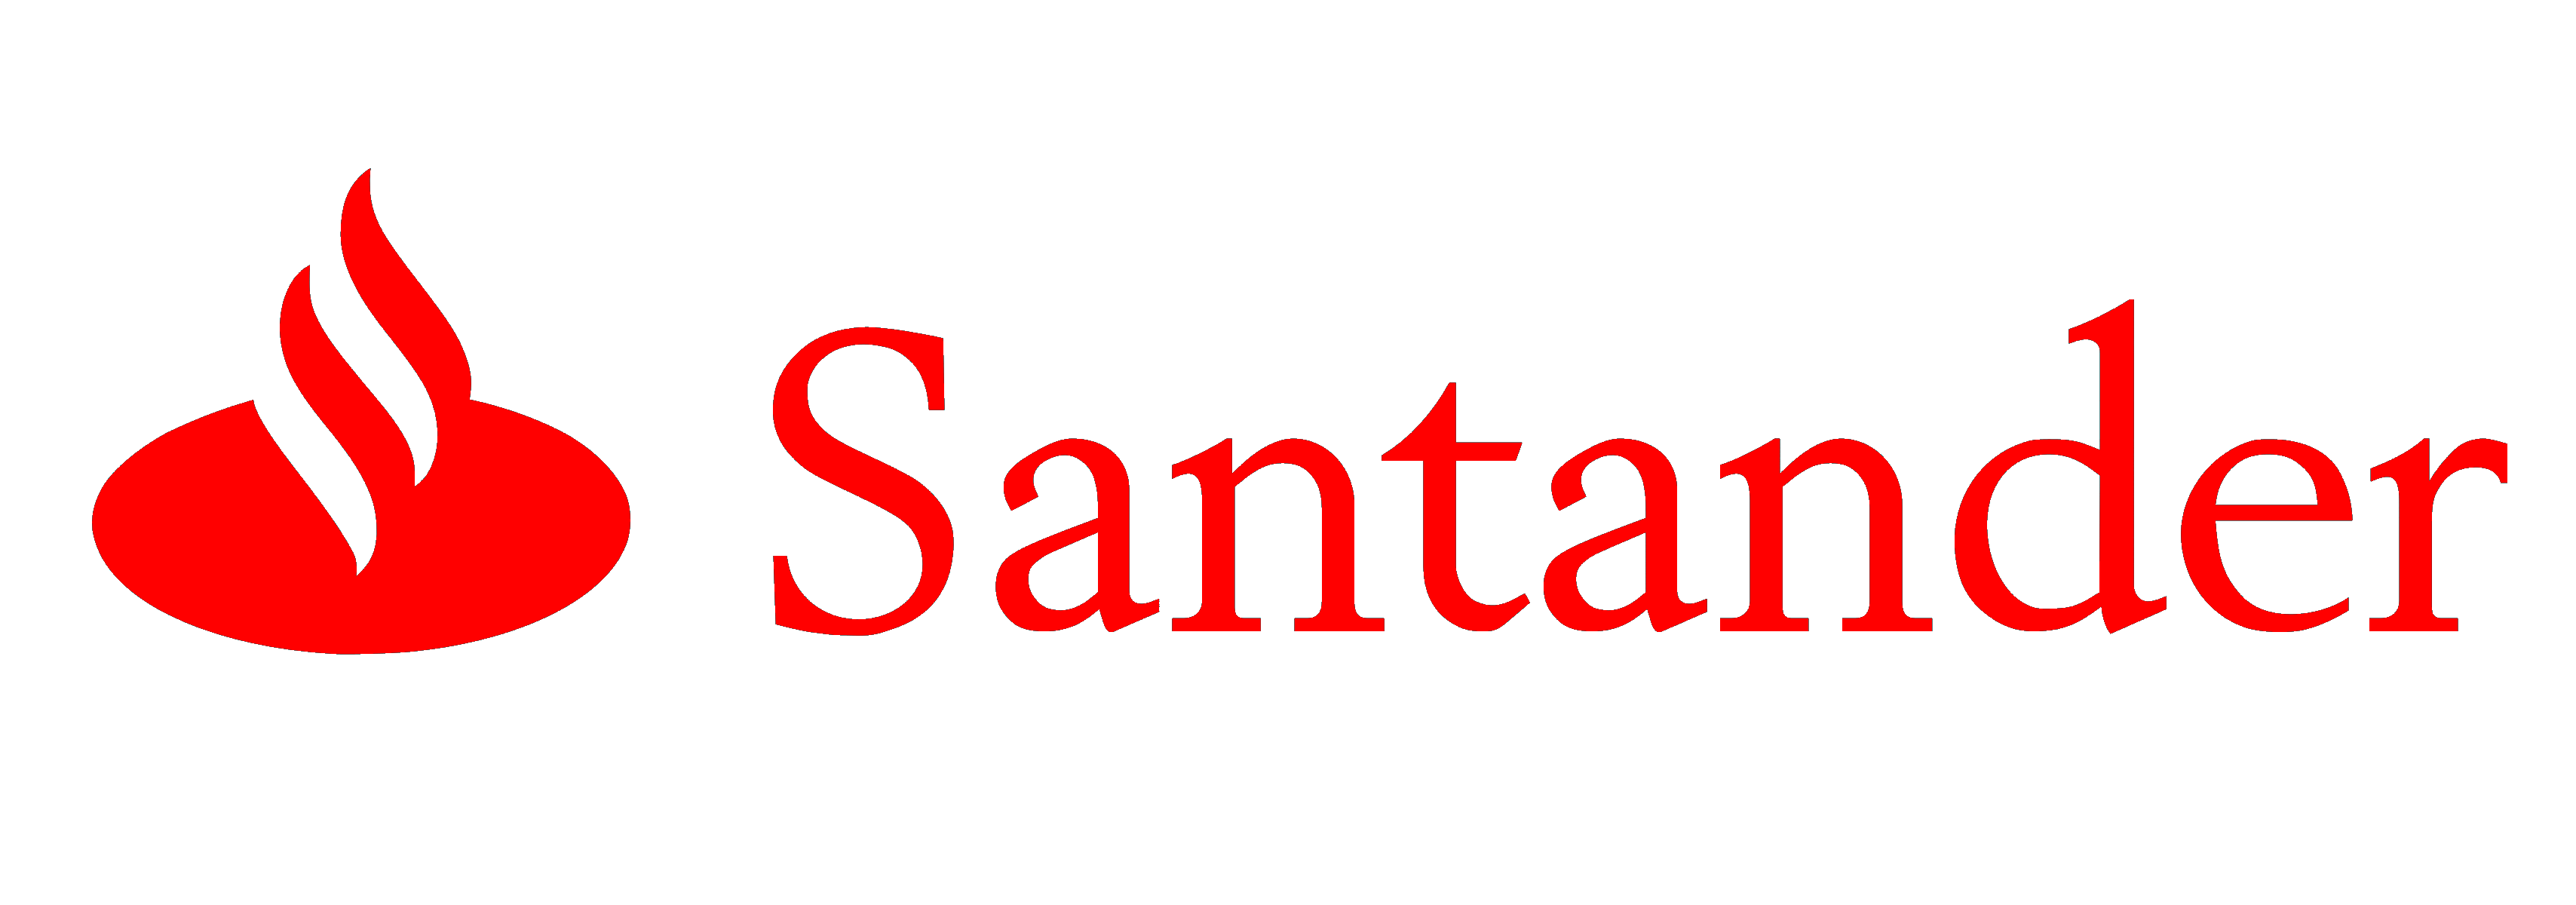 Santander Logo - Santander Logo, Santander Symbol, Meaning, History and Evolution